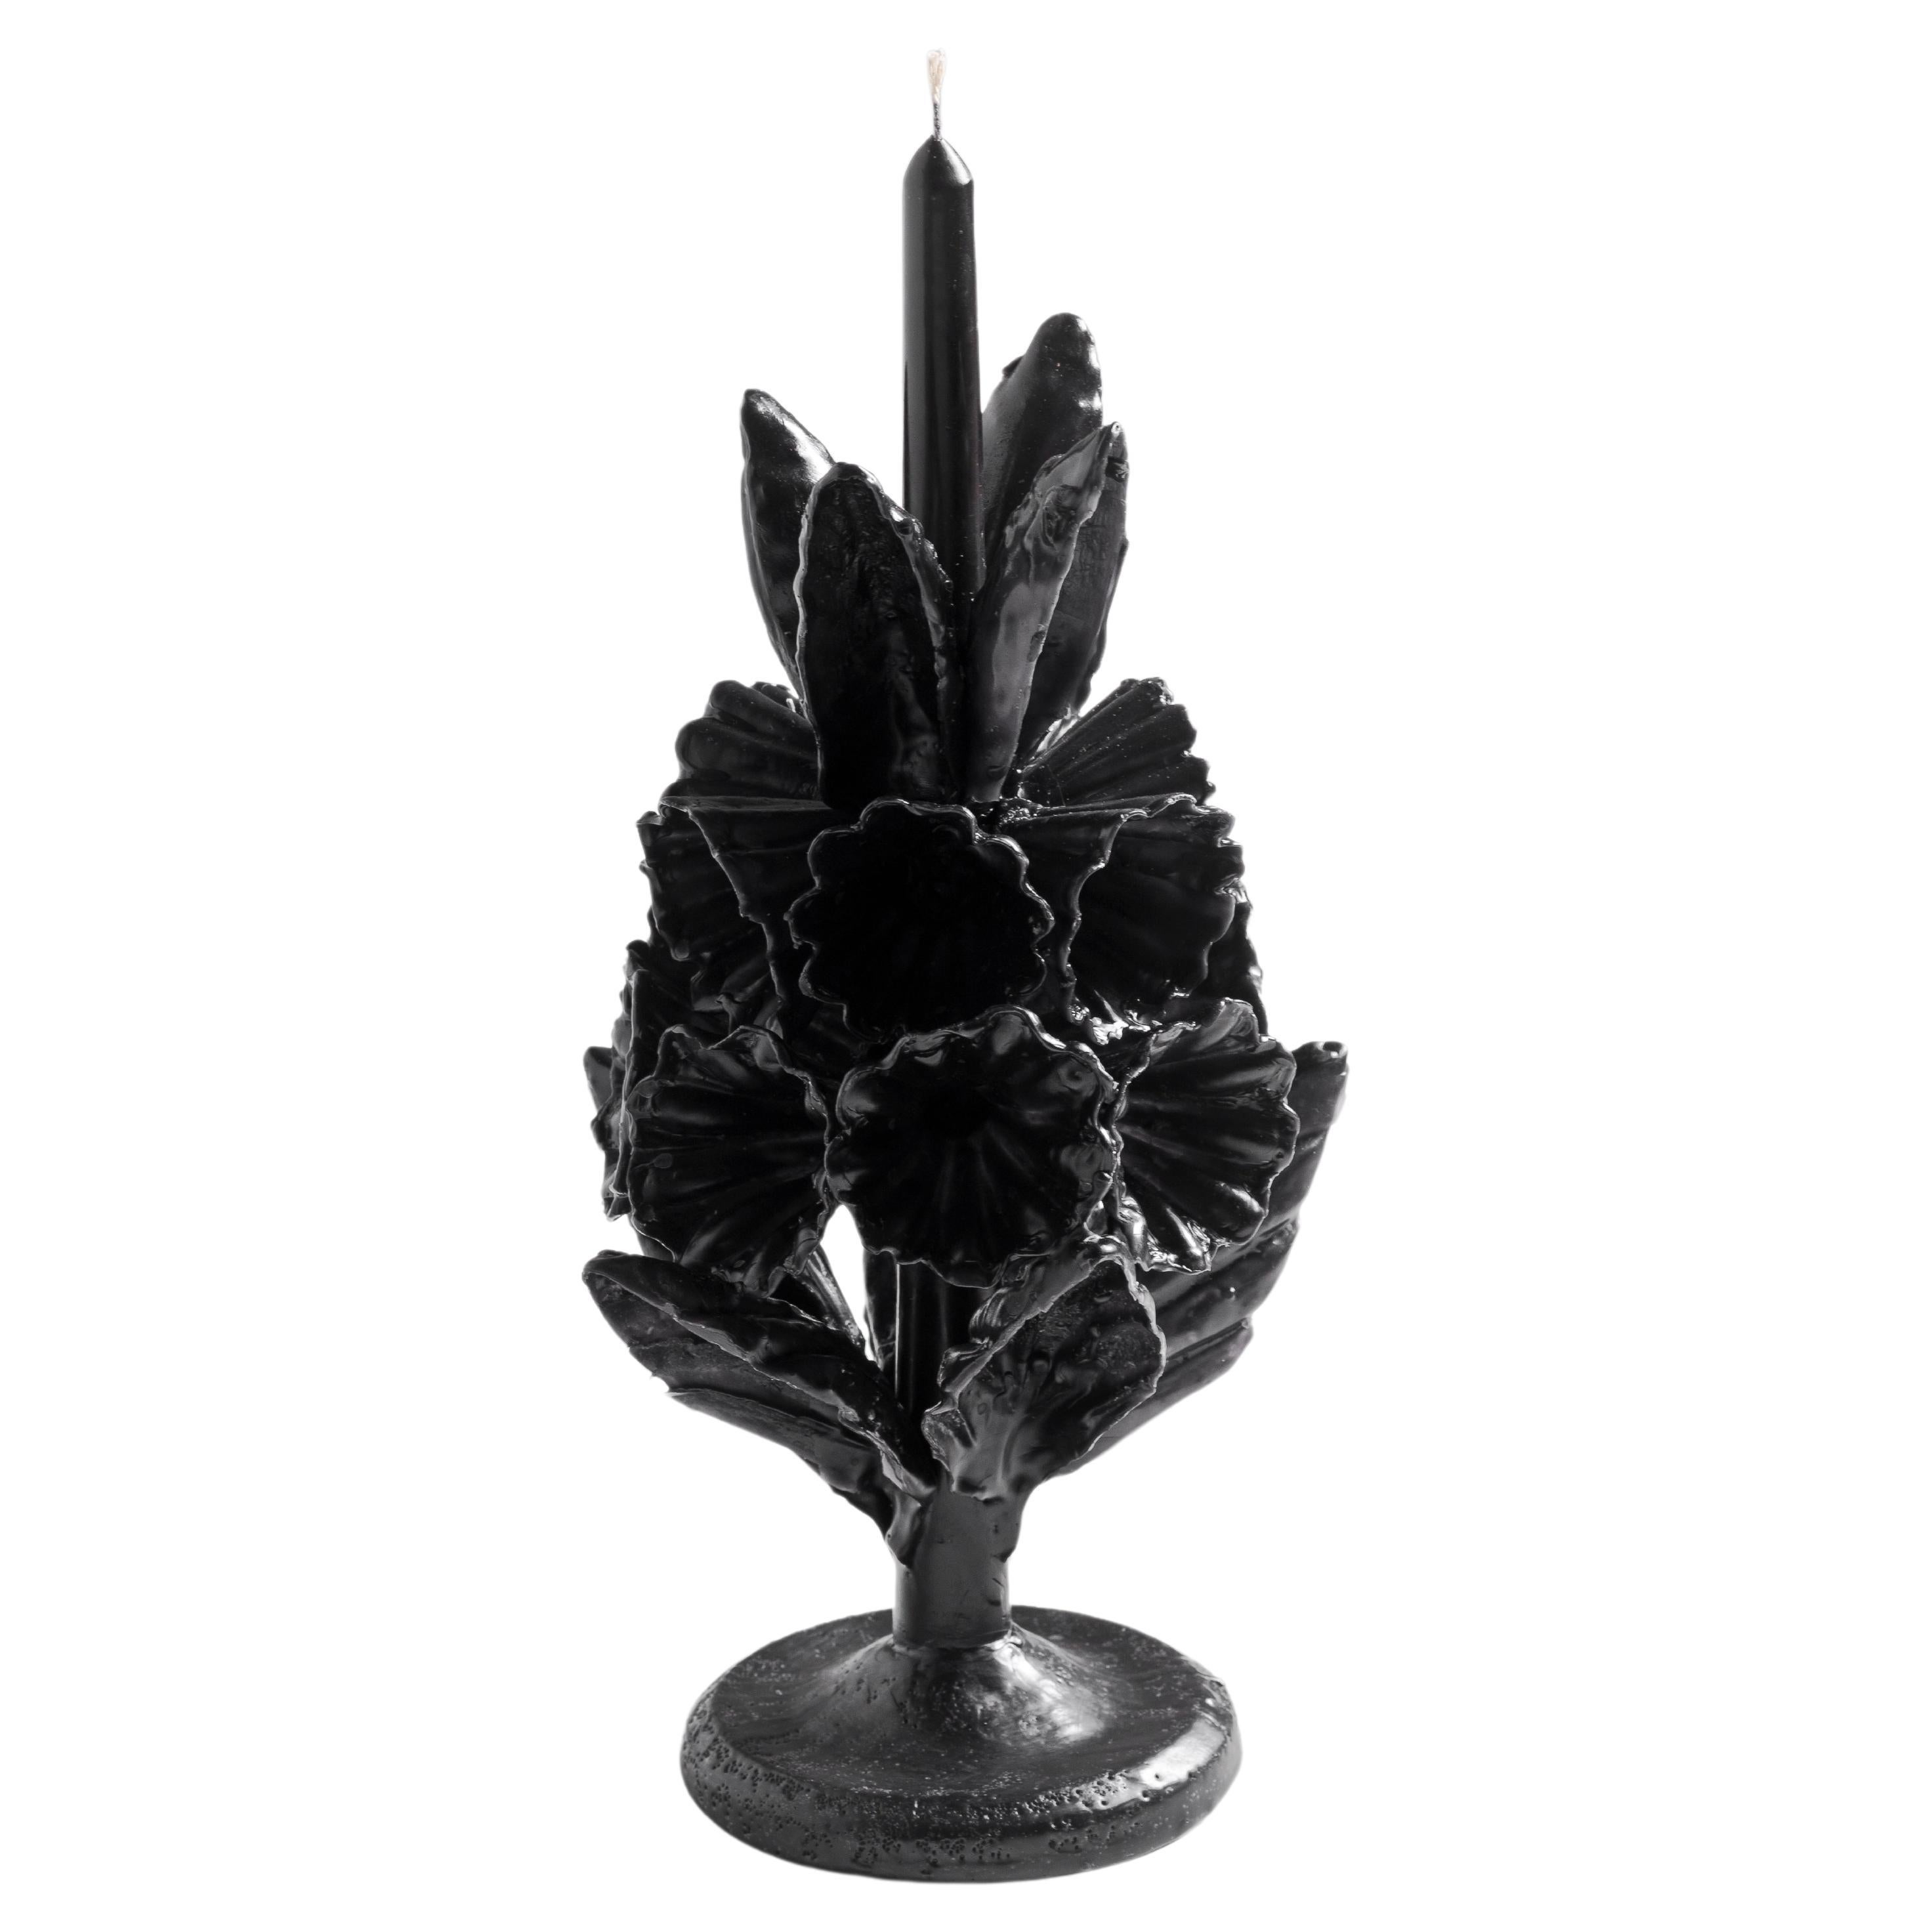 PALMARIO Handcrafted Decorative Traditional Candle in Black by ANDEAN, In Stock For Sale